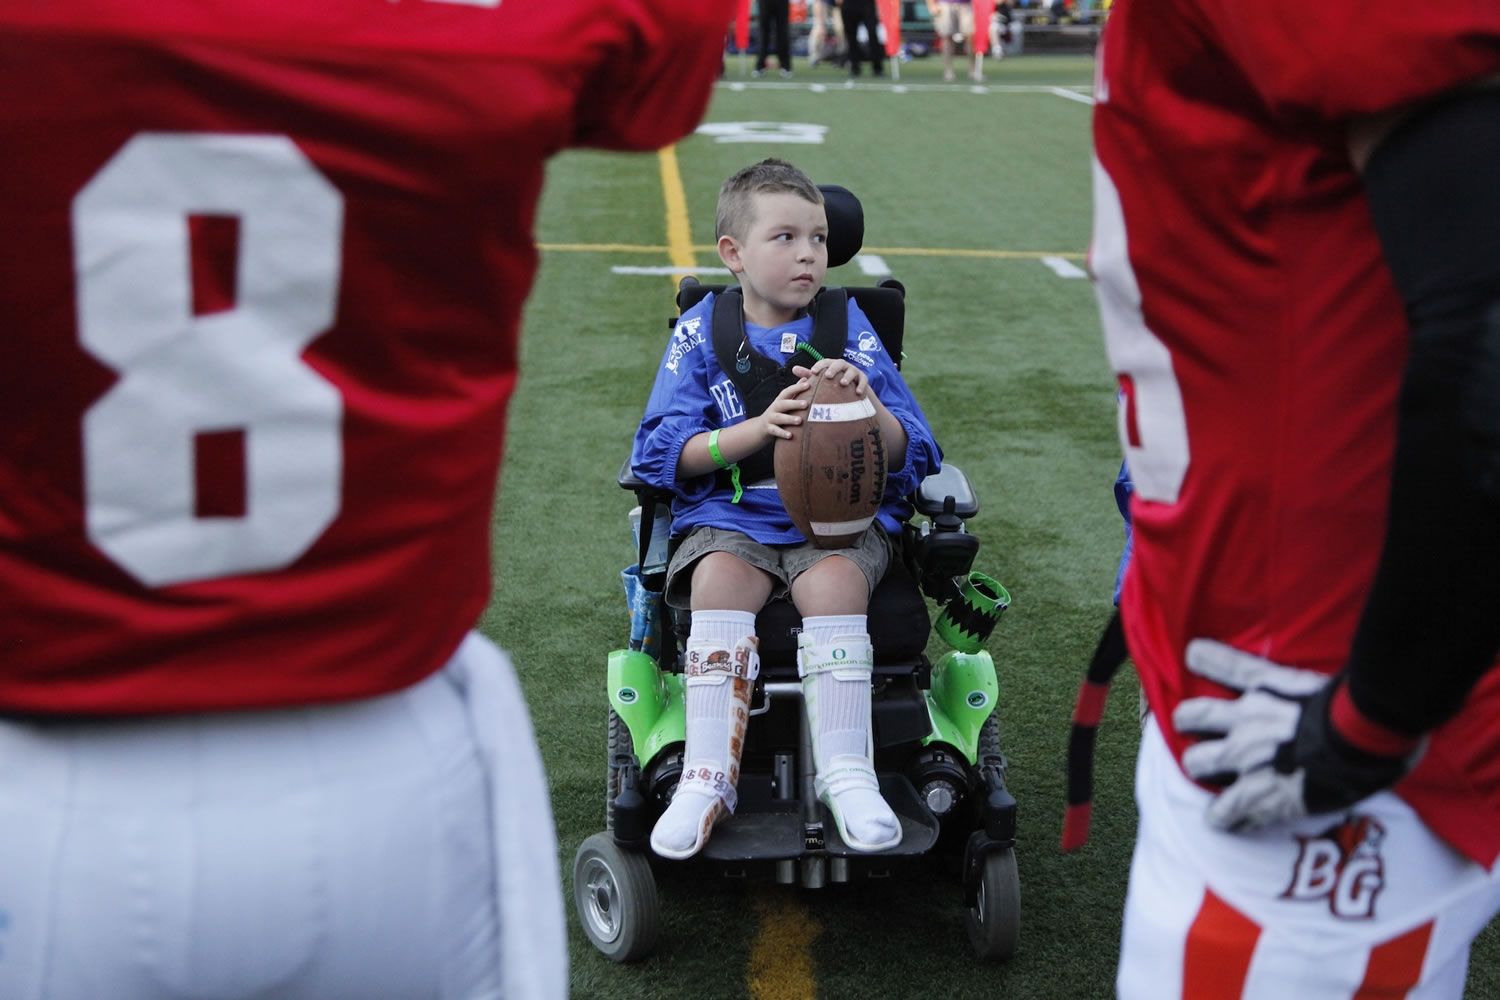 Christopher Hay (7) watches the coin toss prior to the Freedom Bowl at Kiggins Bowl.